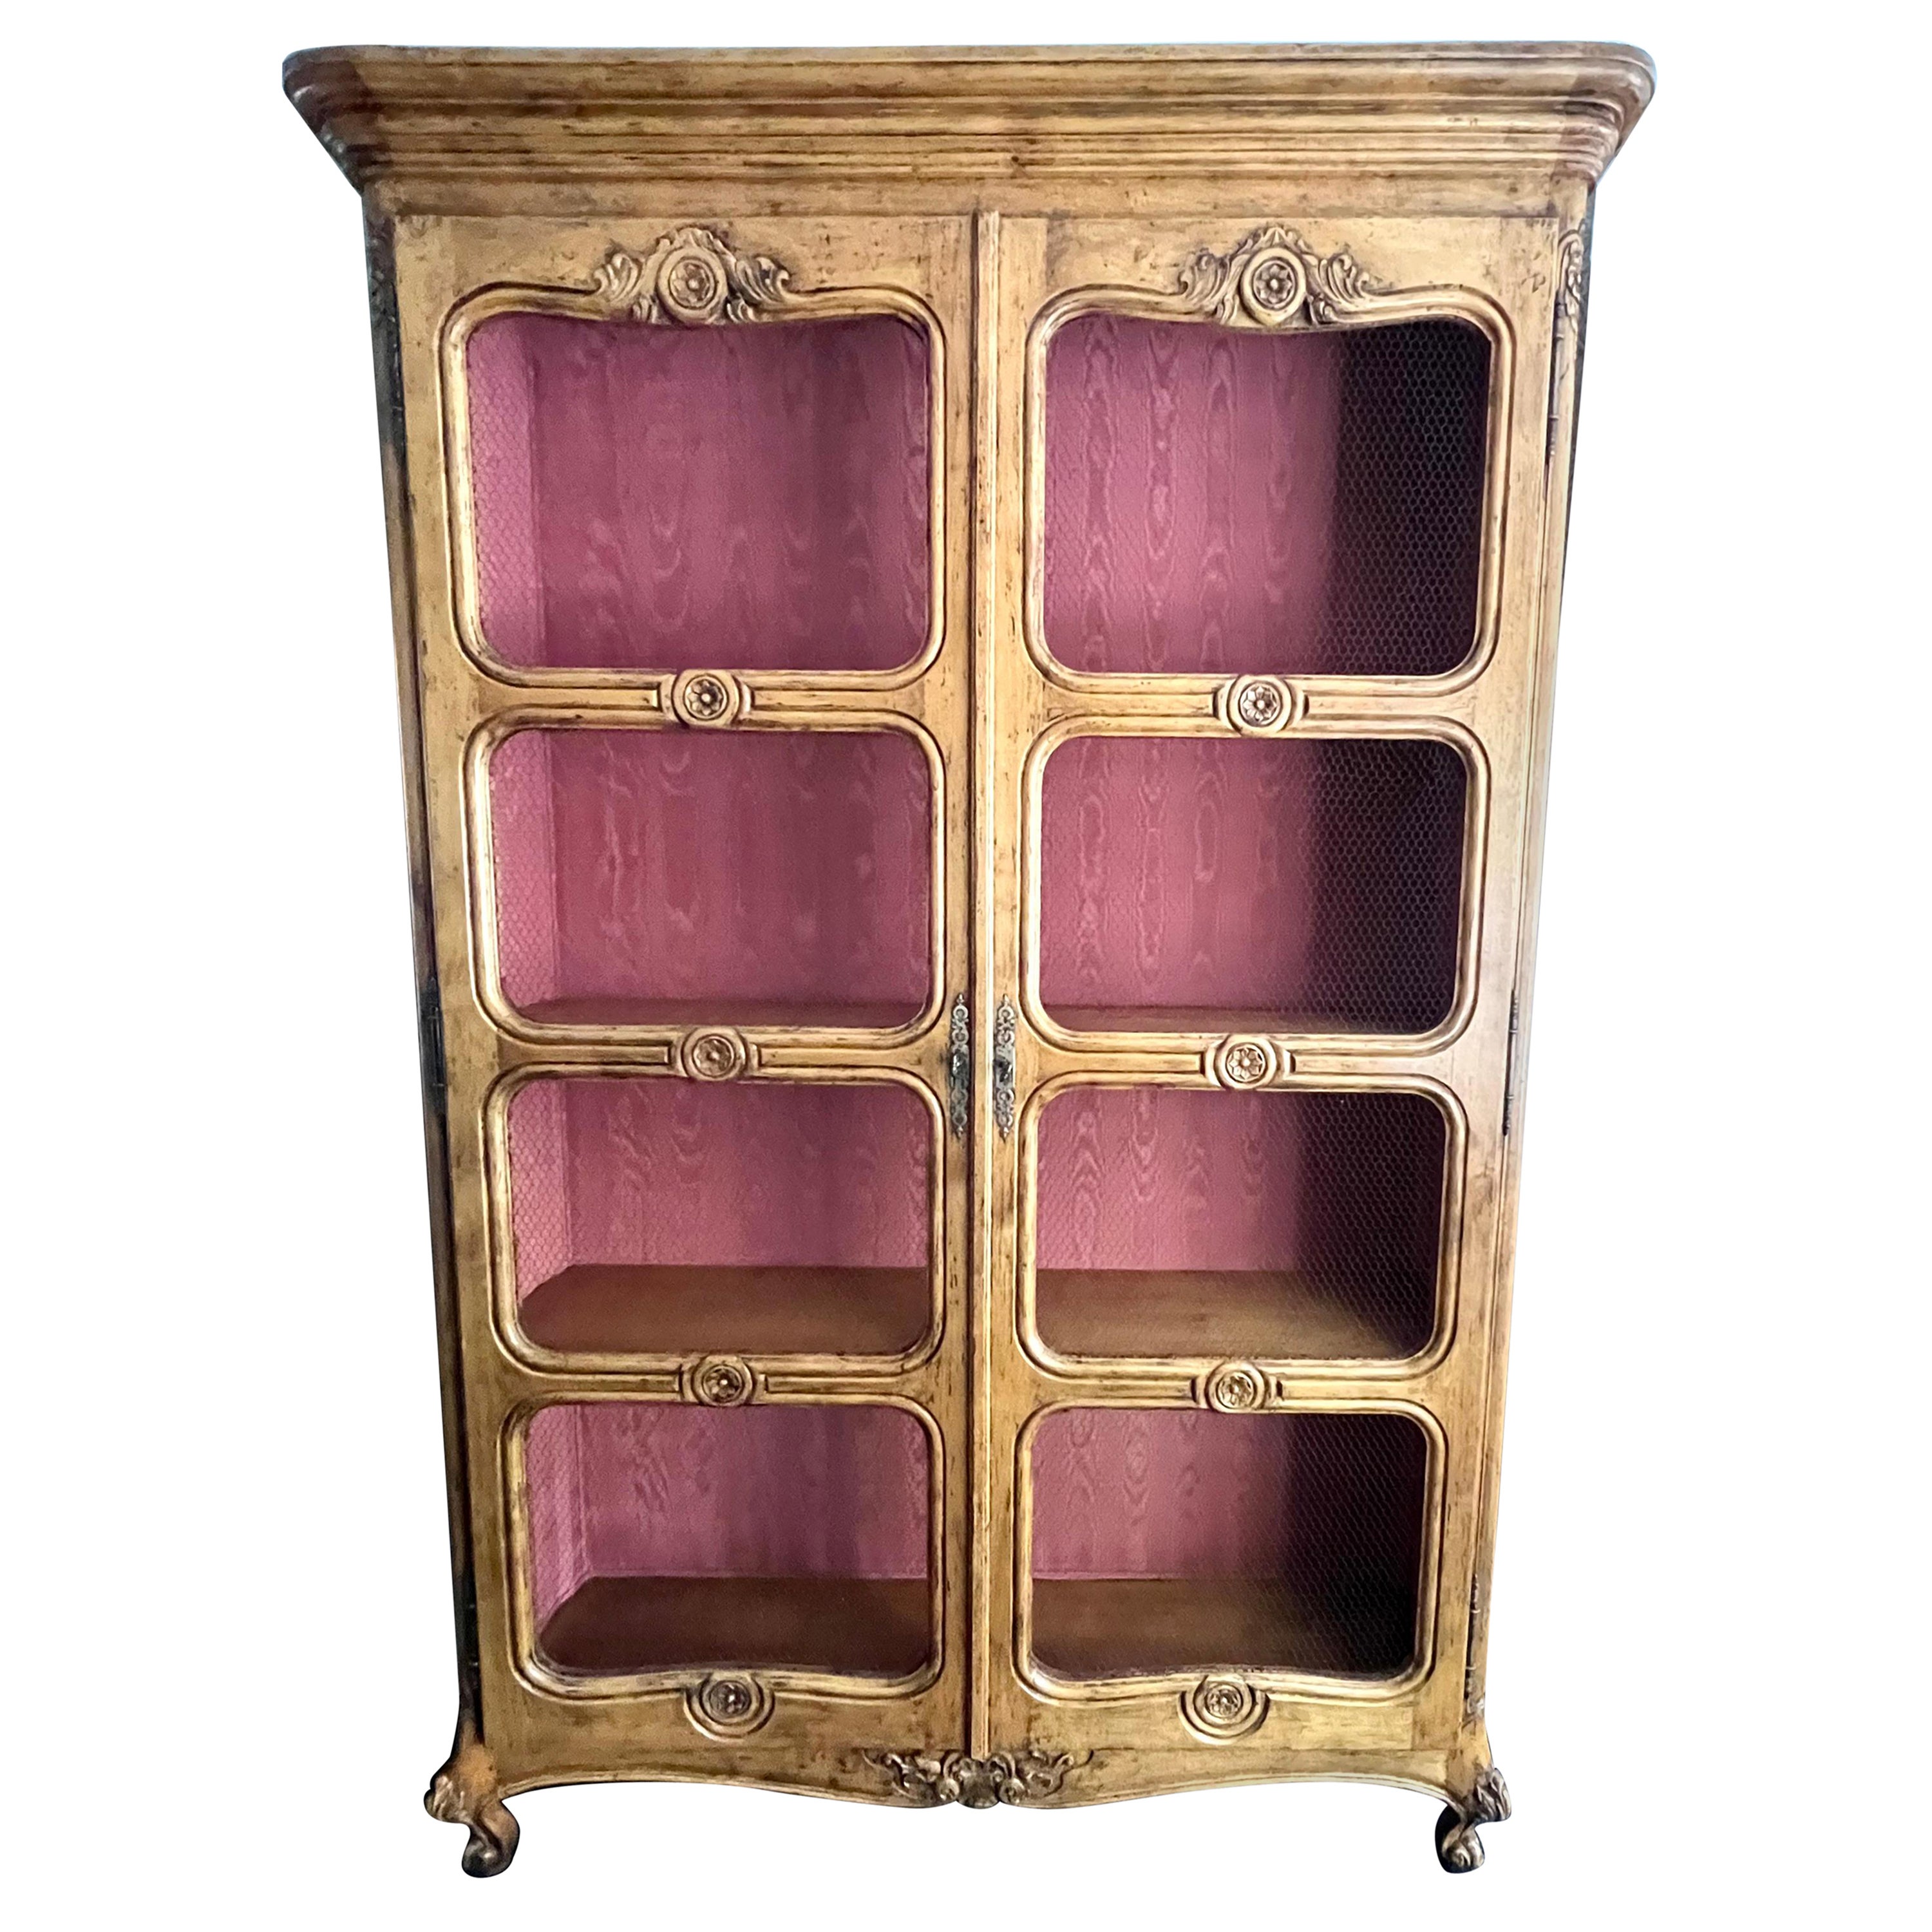 Louis XV Style Bibliotheque or Book Case